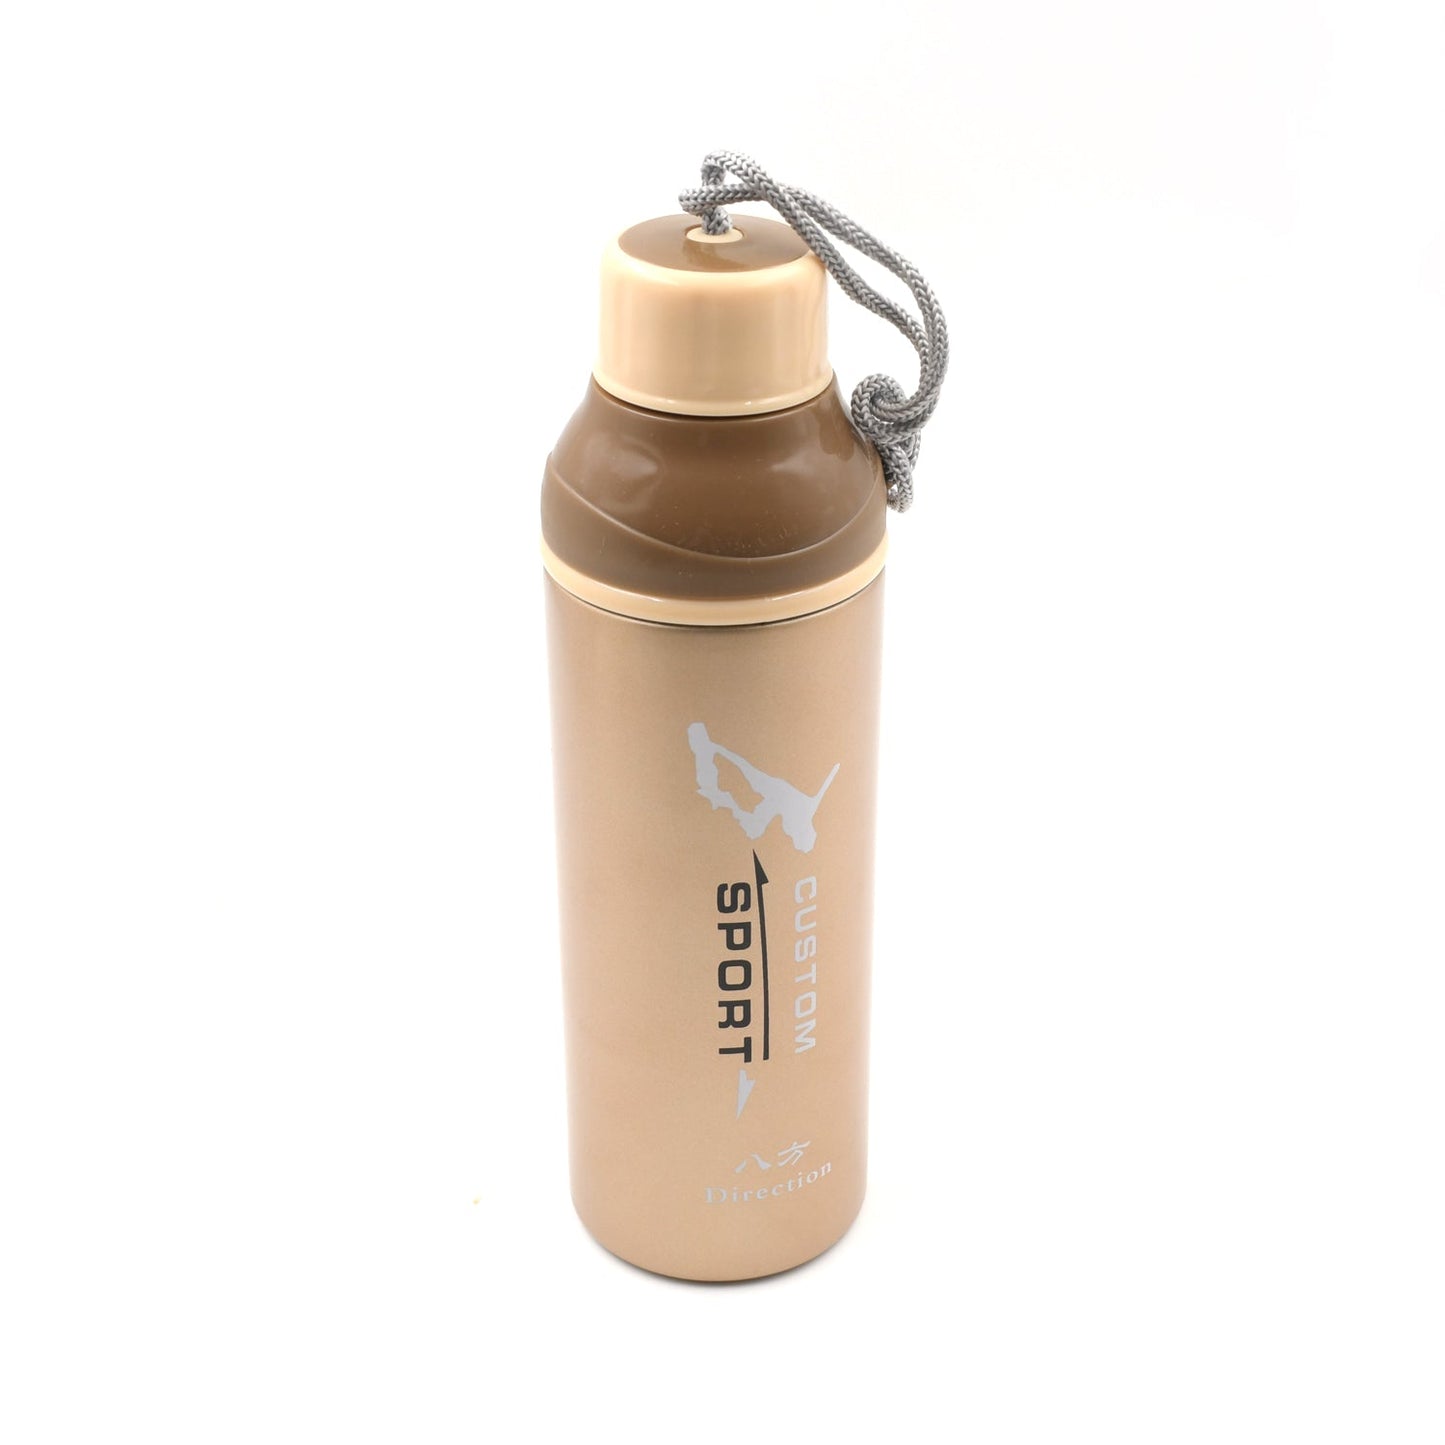 8388 Stainless Steel Vacuum Flask Water Bottle Stainless Steel Drinking Bottle 100% Leak-Proof Insulated Mug Double-Walled - Ultralight Thermos Flask for Office, Sports, Outdoor Kettle, Travel (380 ML)